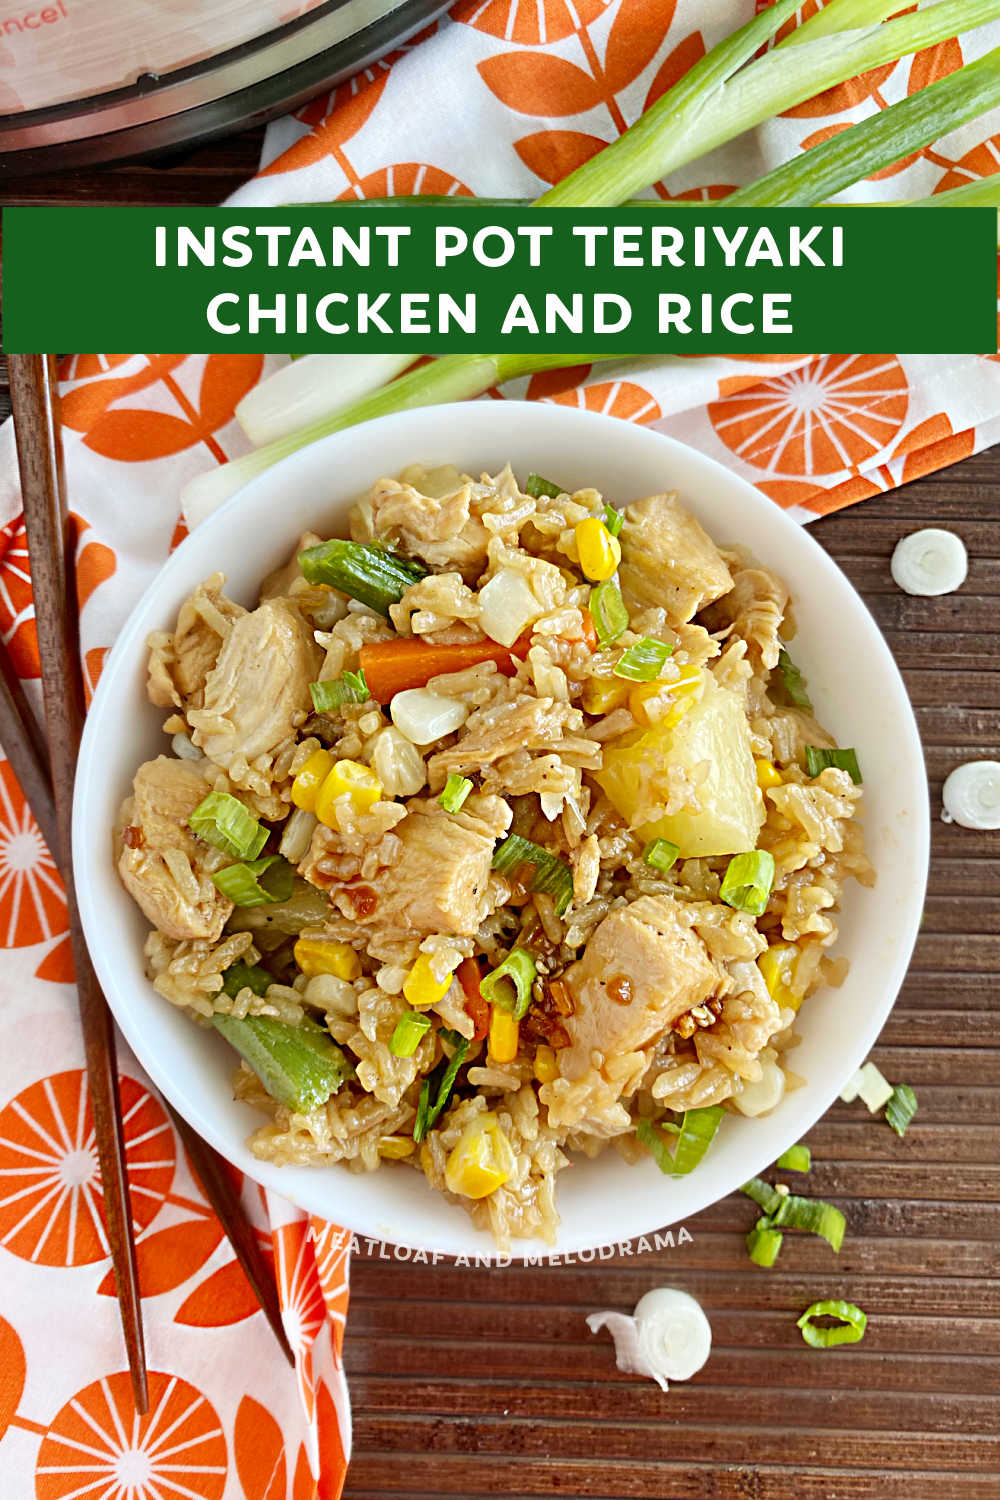 Instant Pot Teriyaki Chicken and Rice is a quick and easy one pot meal made with chicken breasts, jasmine rice, vegetables and teriyaki sauce. This delicious chicken recipe comes together quickly and is perfect for busy weeknights! via @meamel